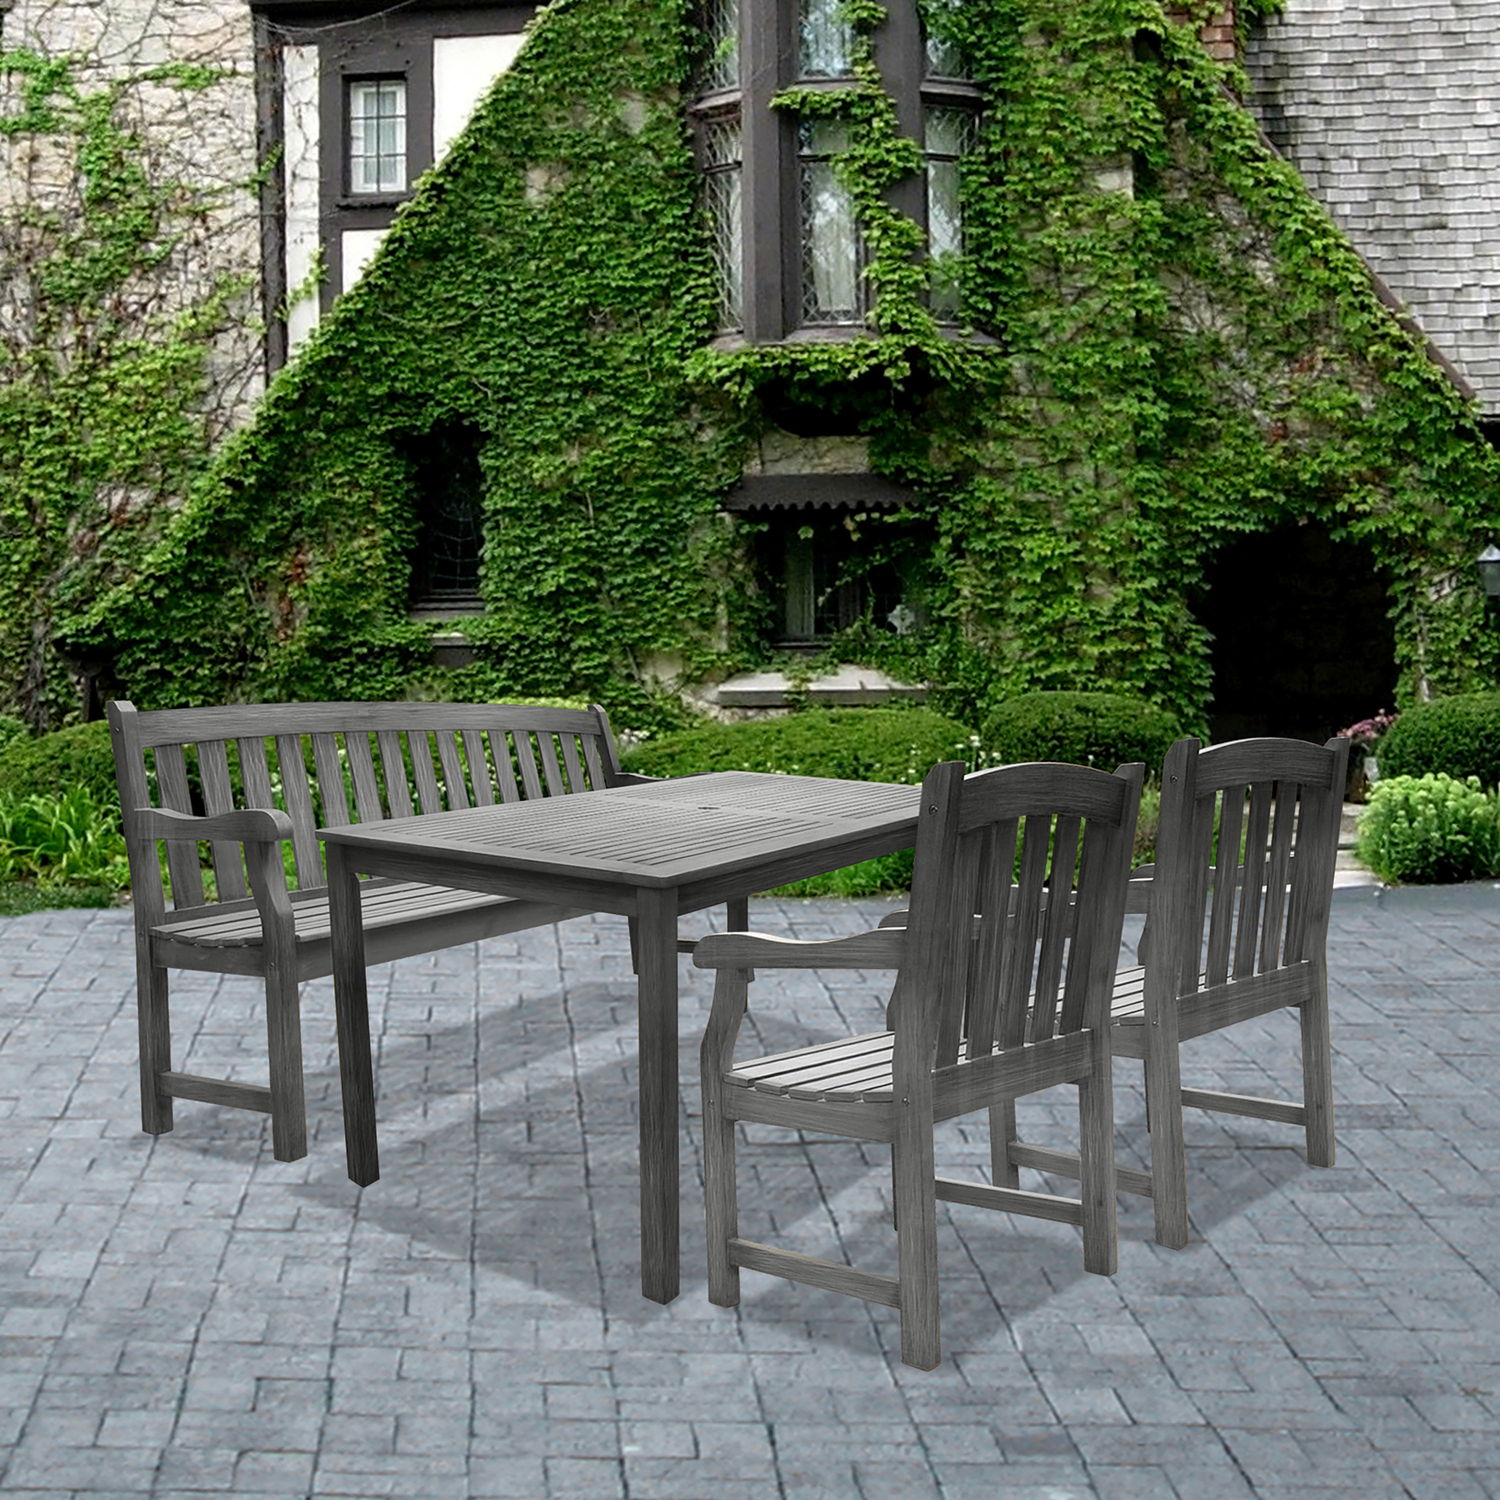 Renaissance Outdoor 4-piece Hand-scraped Wood Patio Dining Set with 5-foot Bench